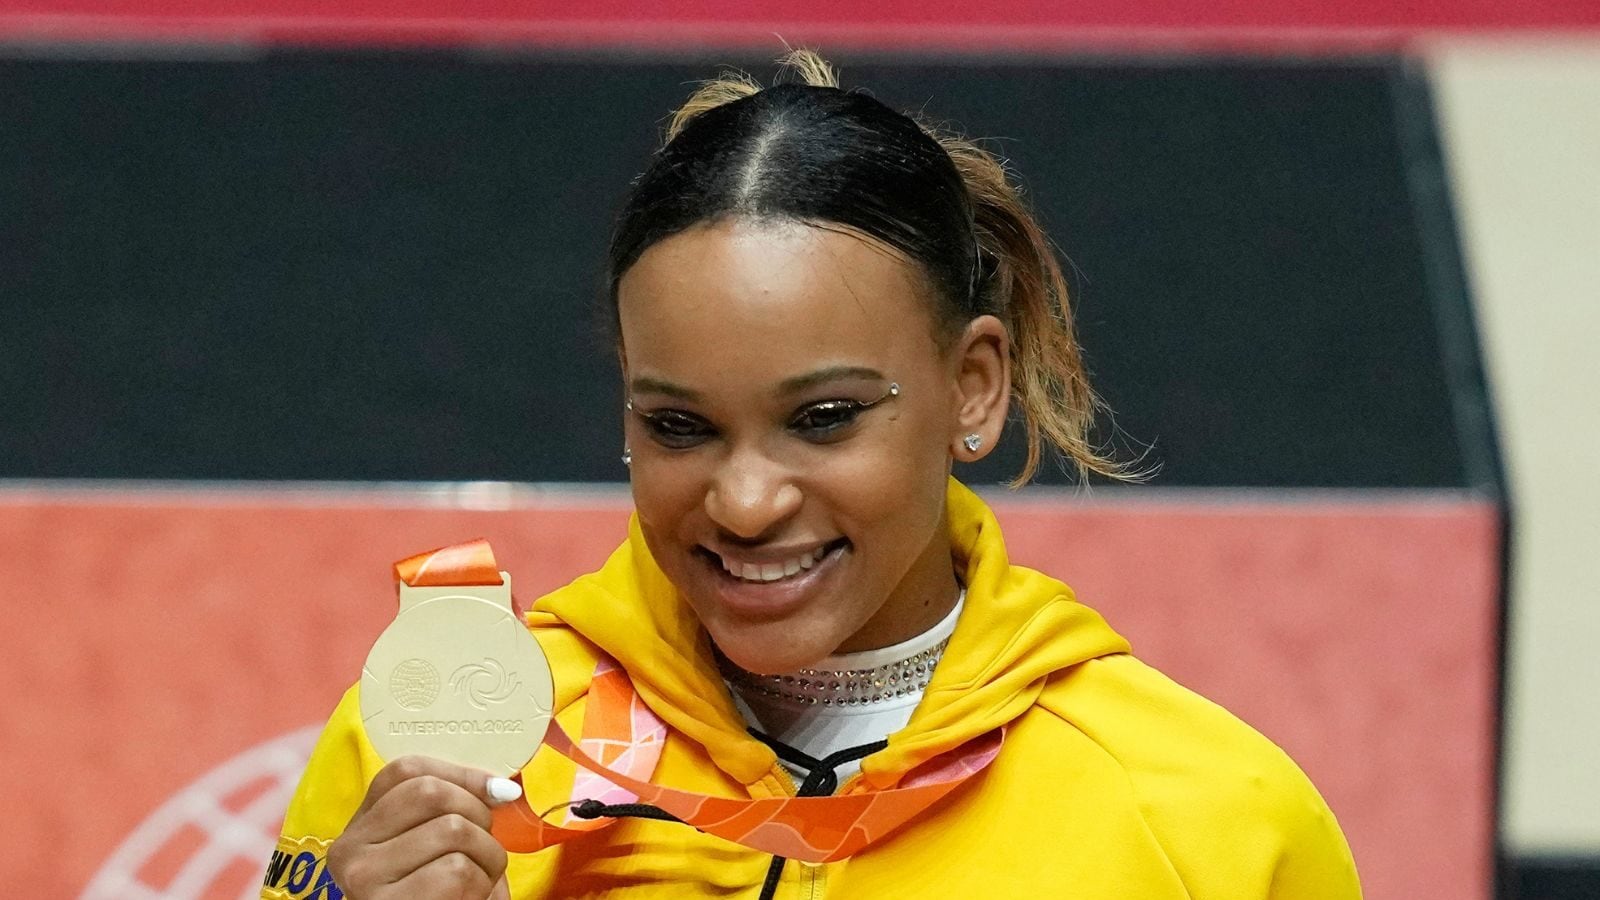 US american saying only black americans can be black. Rebeca Andrade (from  brazil), won the silver medal in the World Artistic Gymnastics Championship  today. They think she's not black, but afro latina. 